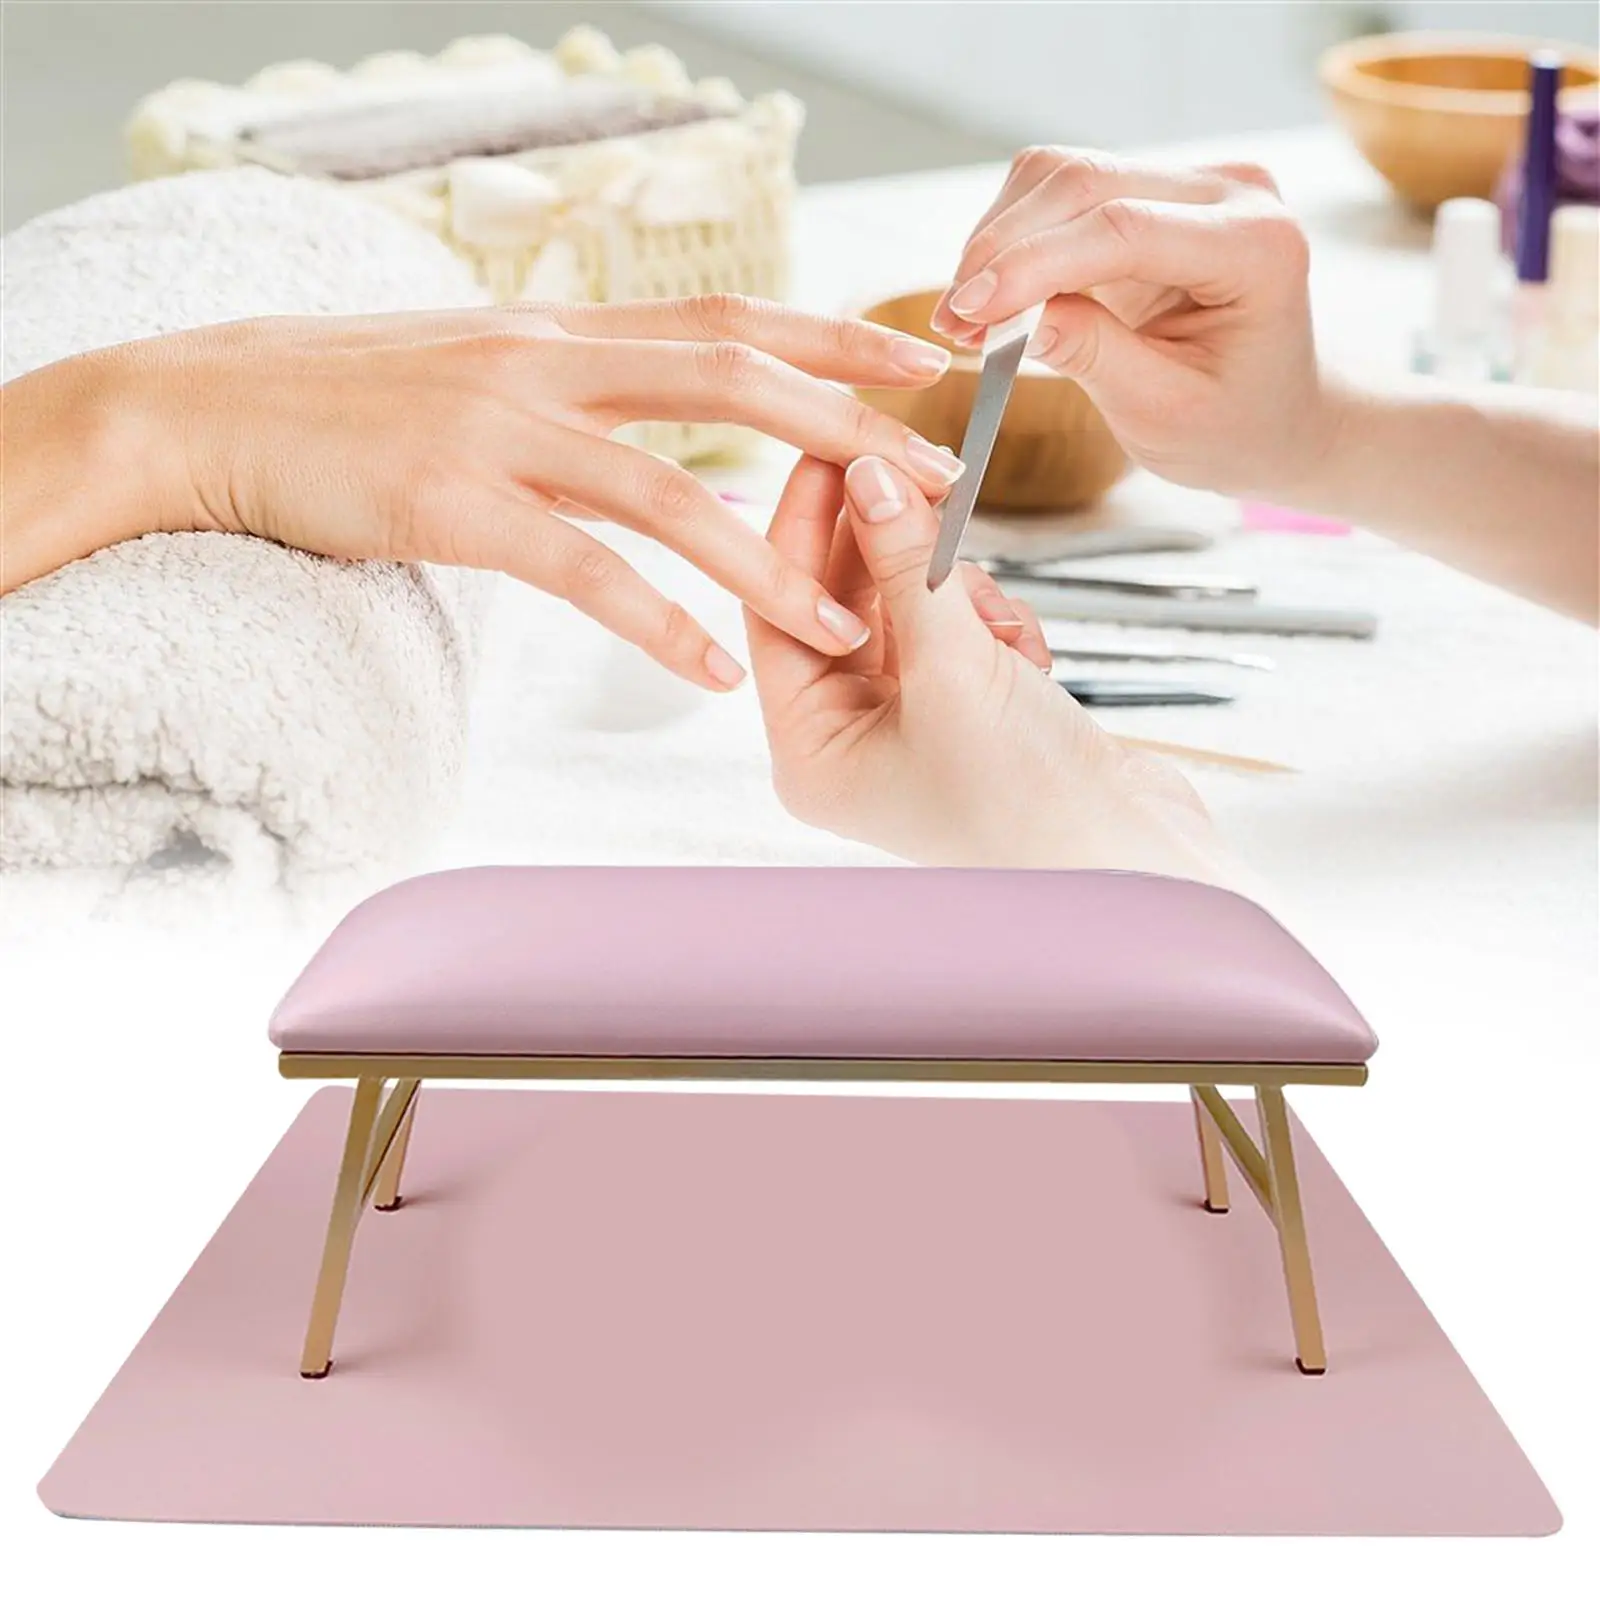 Nail Pillow and Mat PU Leather Soft Hand Cushion Arm Rest for Nails Nail Art Cushion Mat Set for Manicurist Salon Home Hand Arm